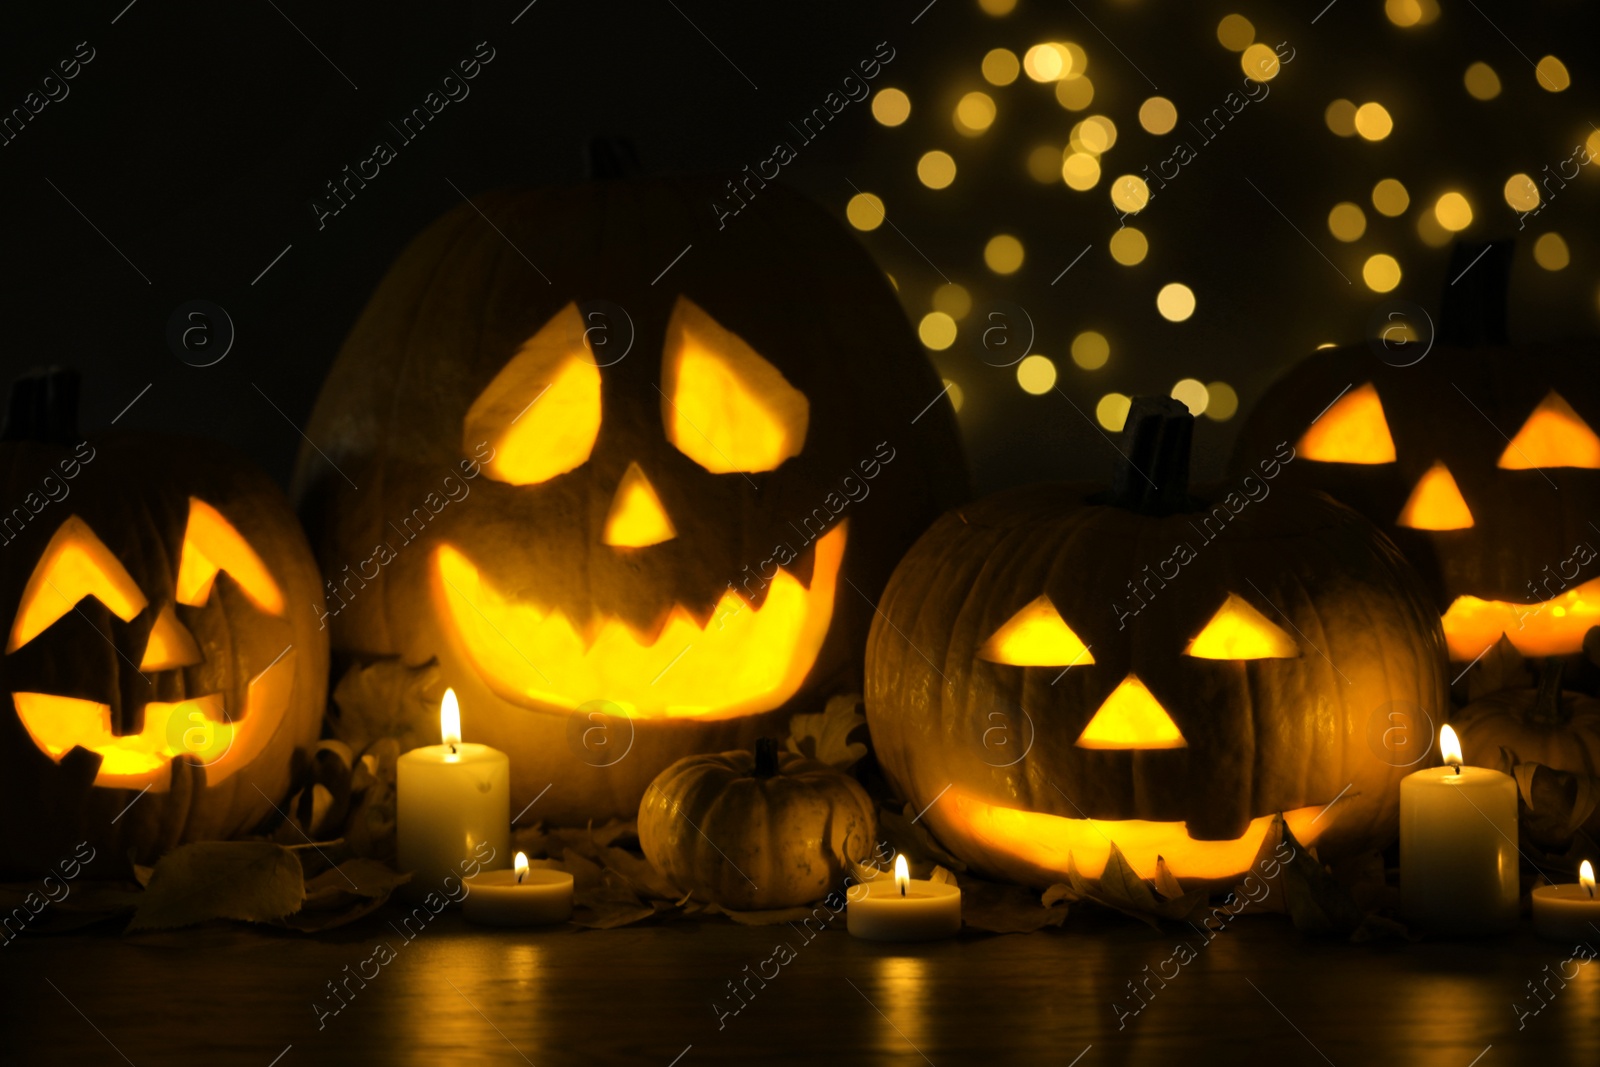 Photo of Pumpkin jack o'lanterns, autumn leaves and candles on table against blurred background. Halloween decor